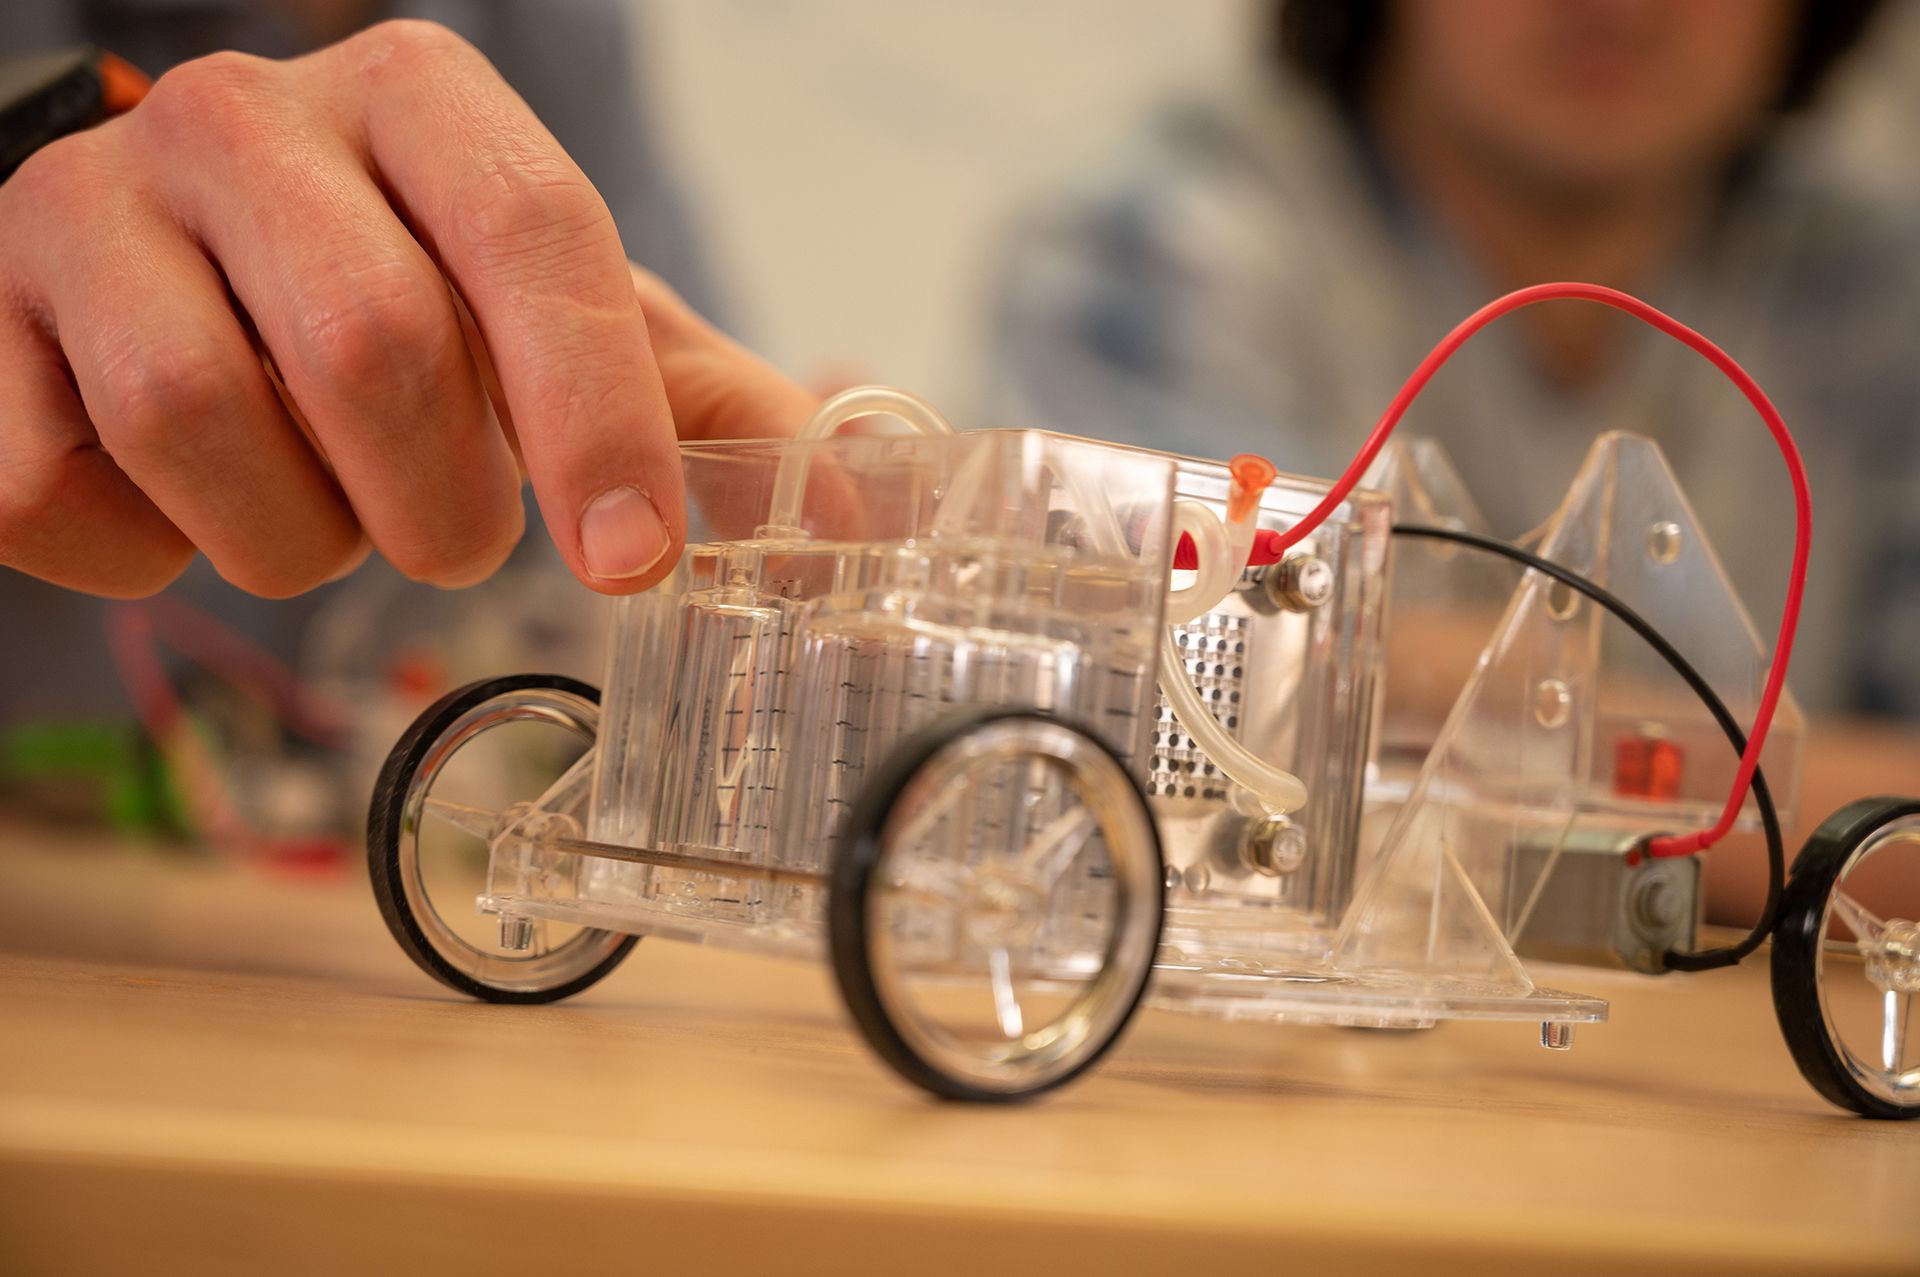 A close up image of a transparent car used to show how fuel cells work